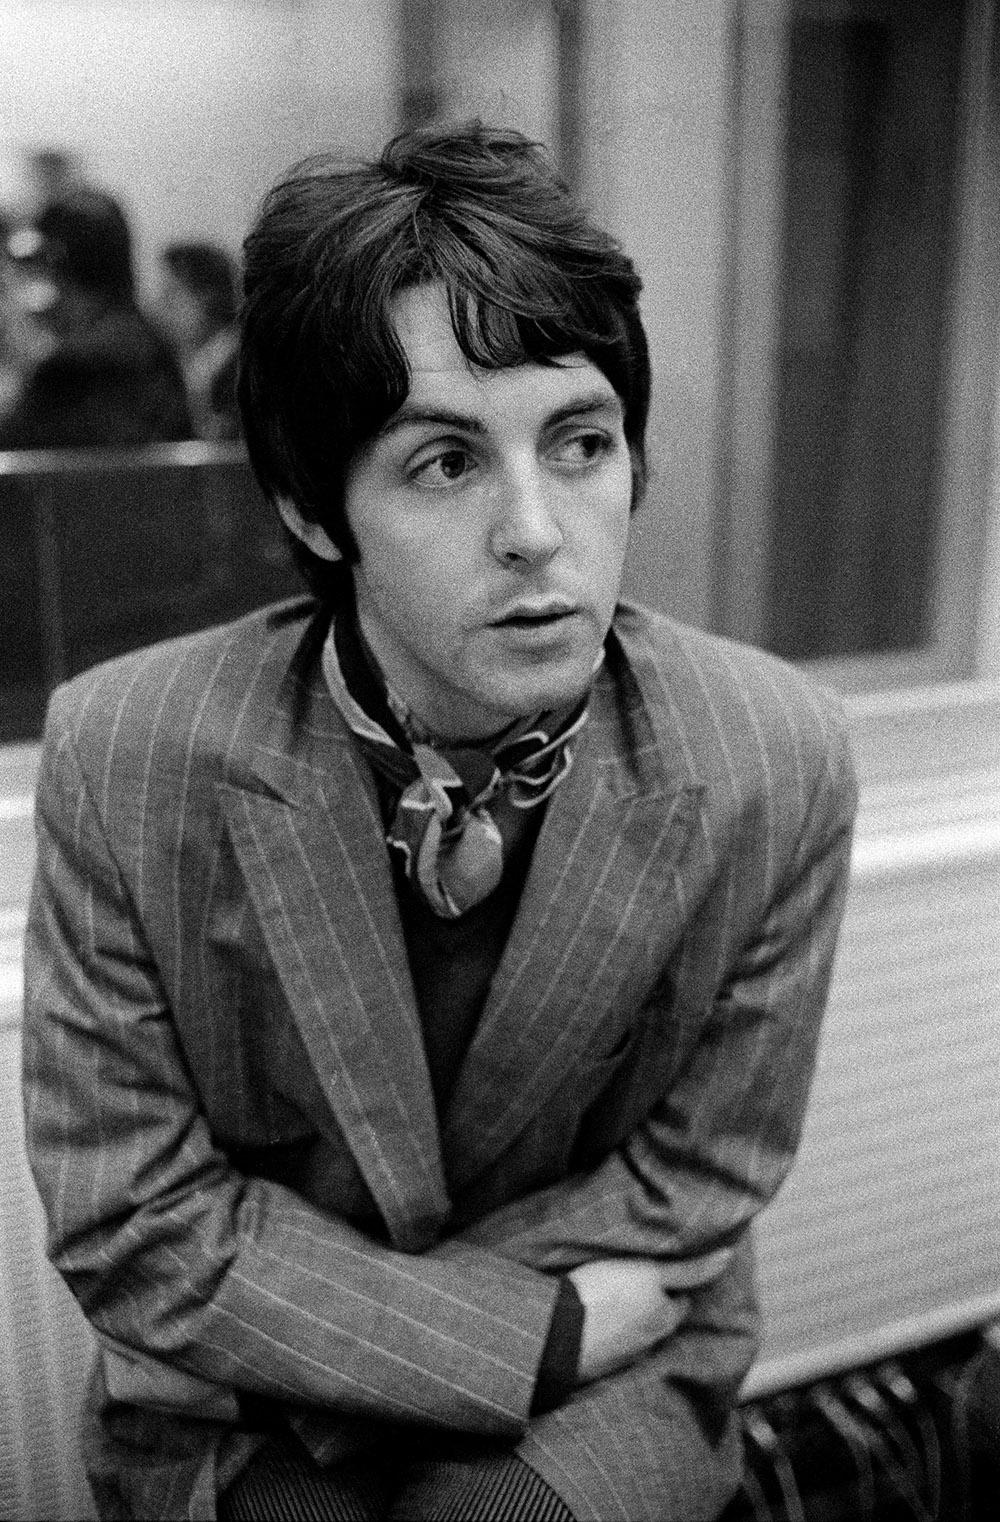 Gered Mankowitz Black and White Photograph - 'Paul McCartney Pinstripe'  SIGNED, LIMITED EDITION 